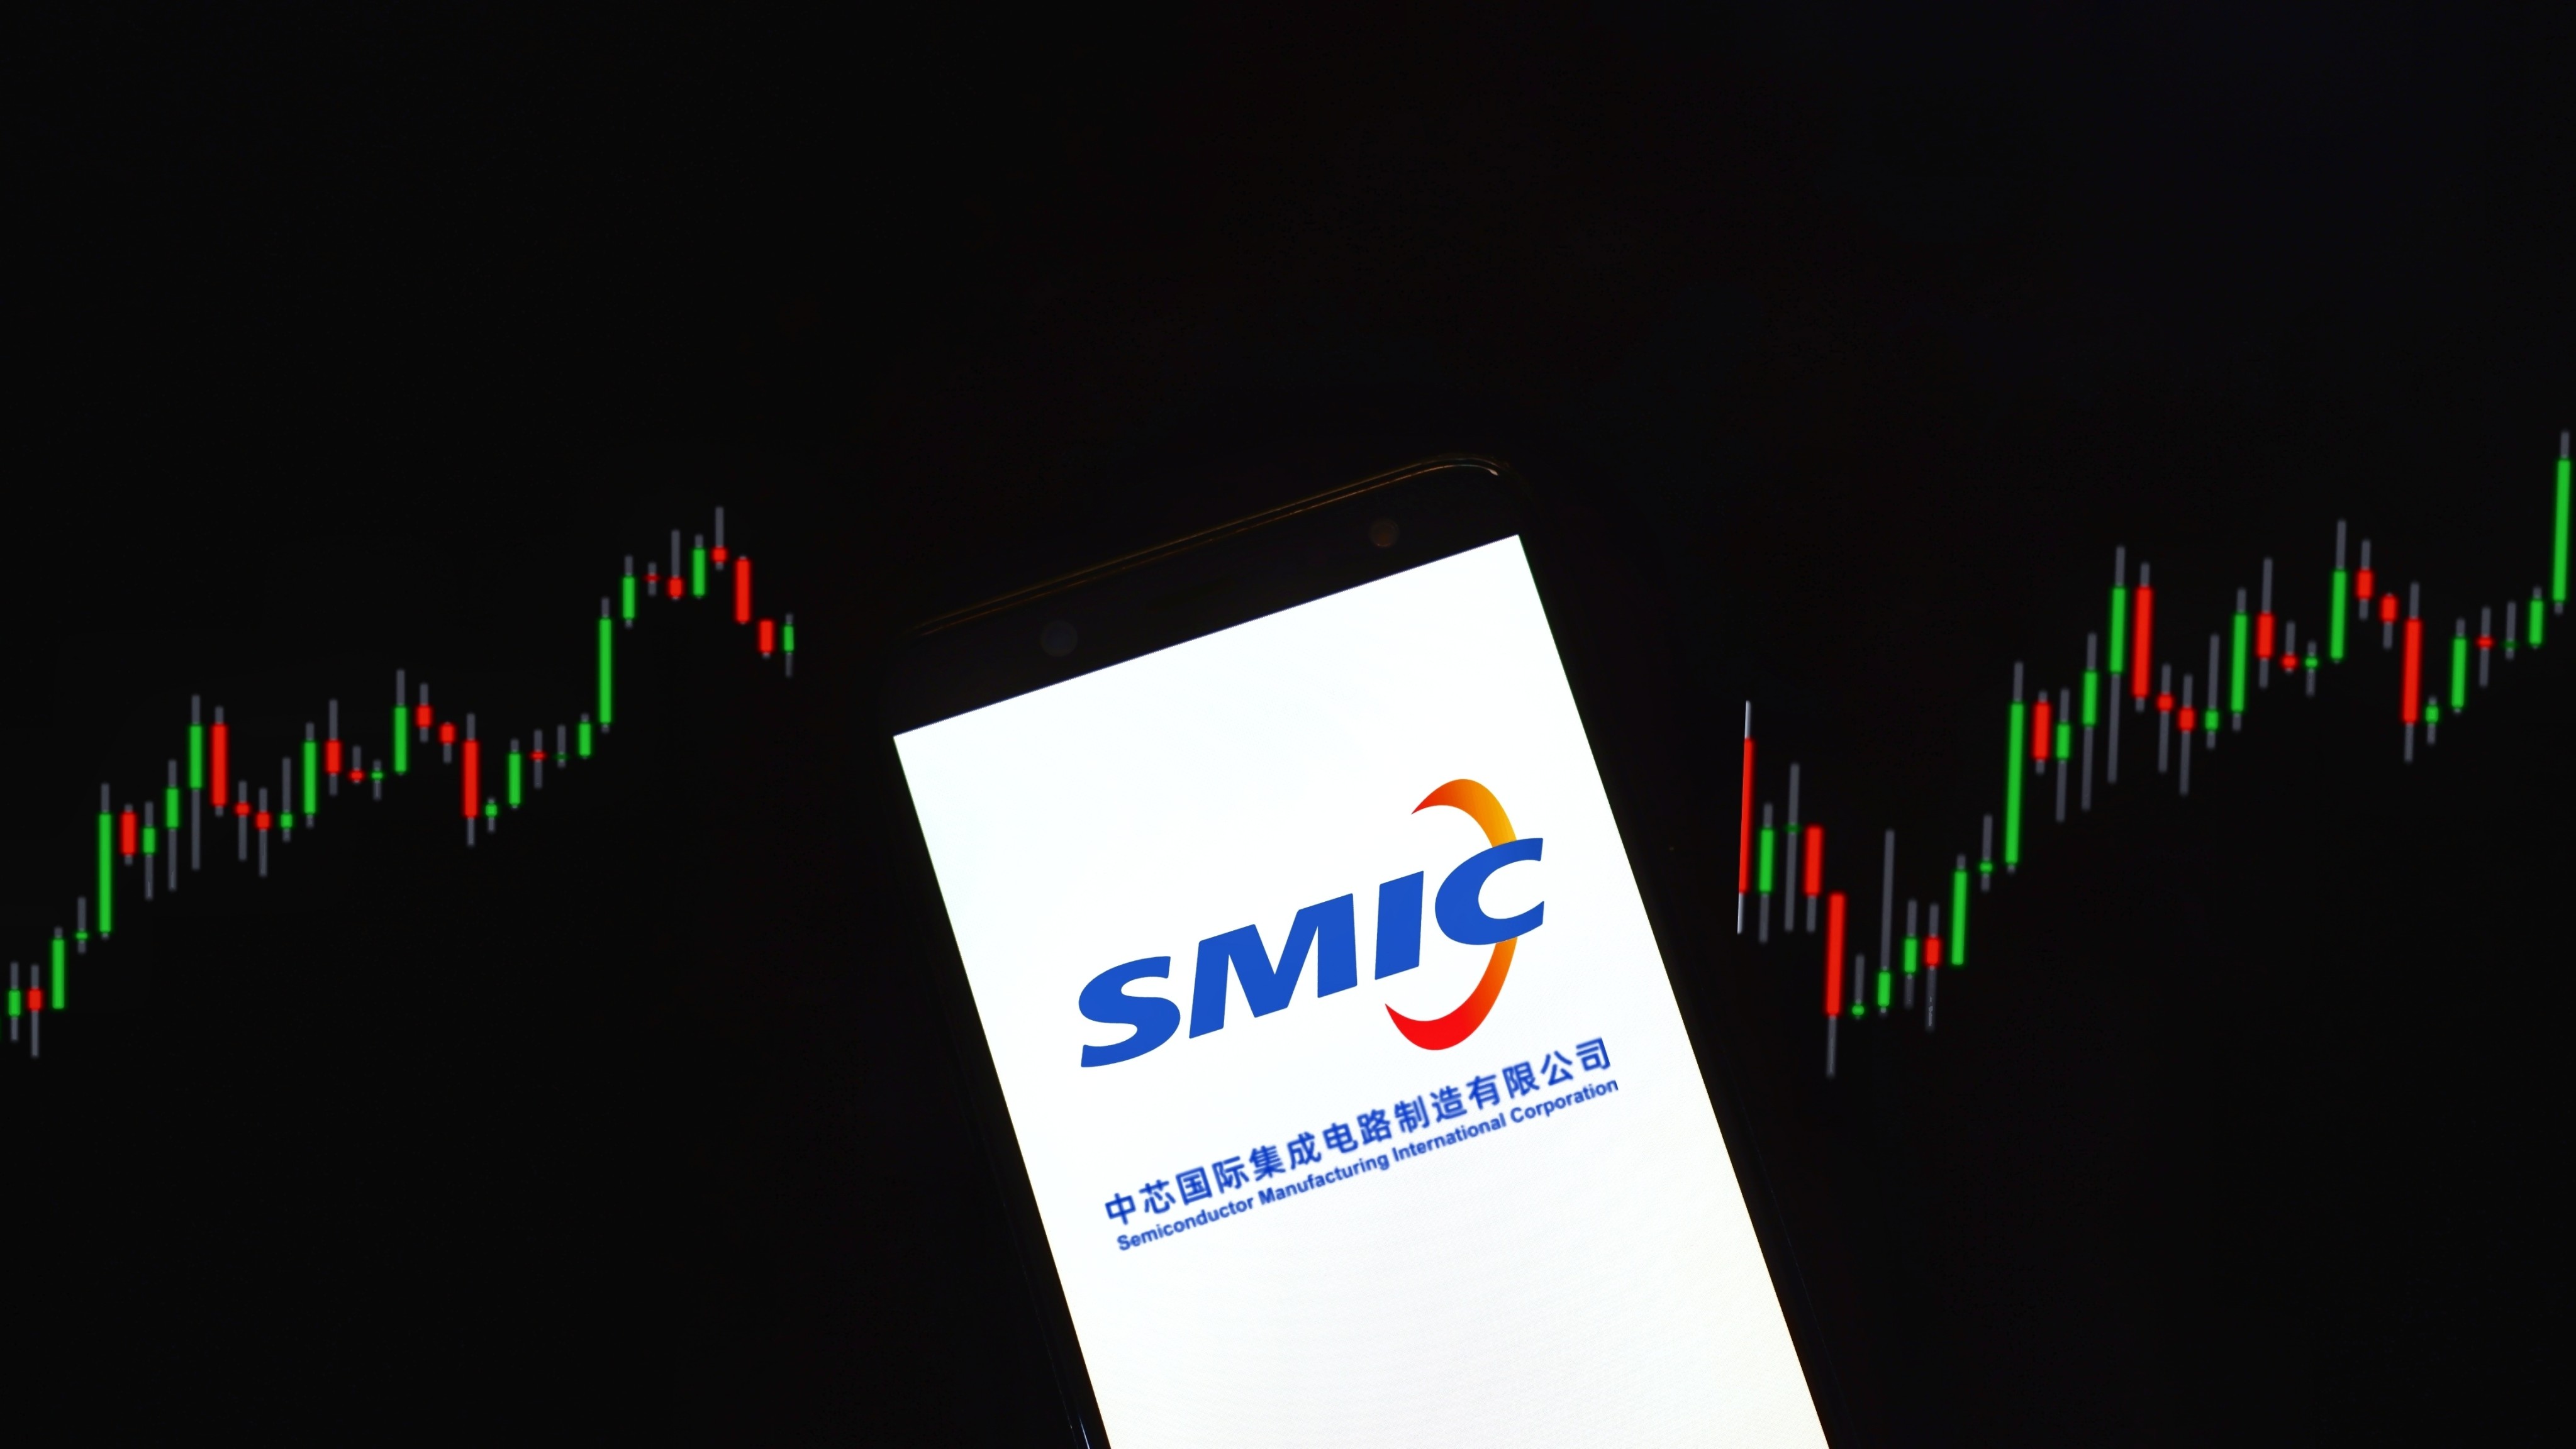 The latest executive reshuffle at the top of Semiconductor Manufacturing International Corp’s senior management reflects how Beijing is exerting greater control over the company. Photo: Shutterstock